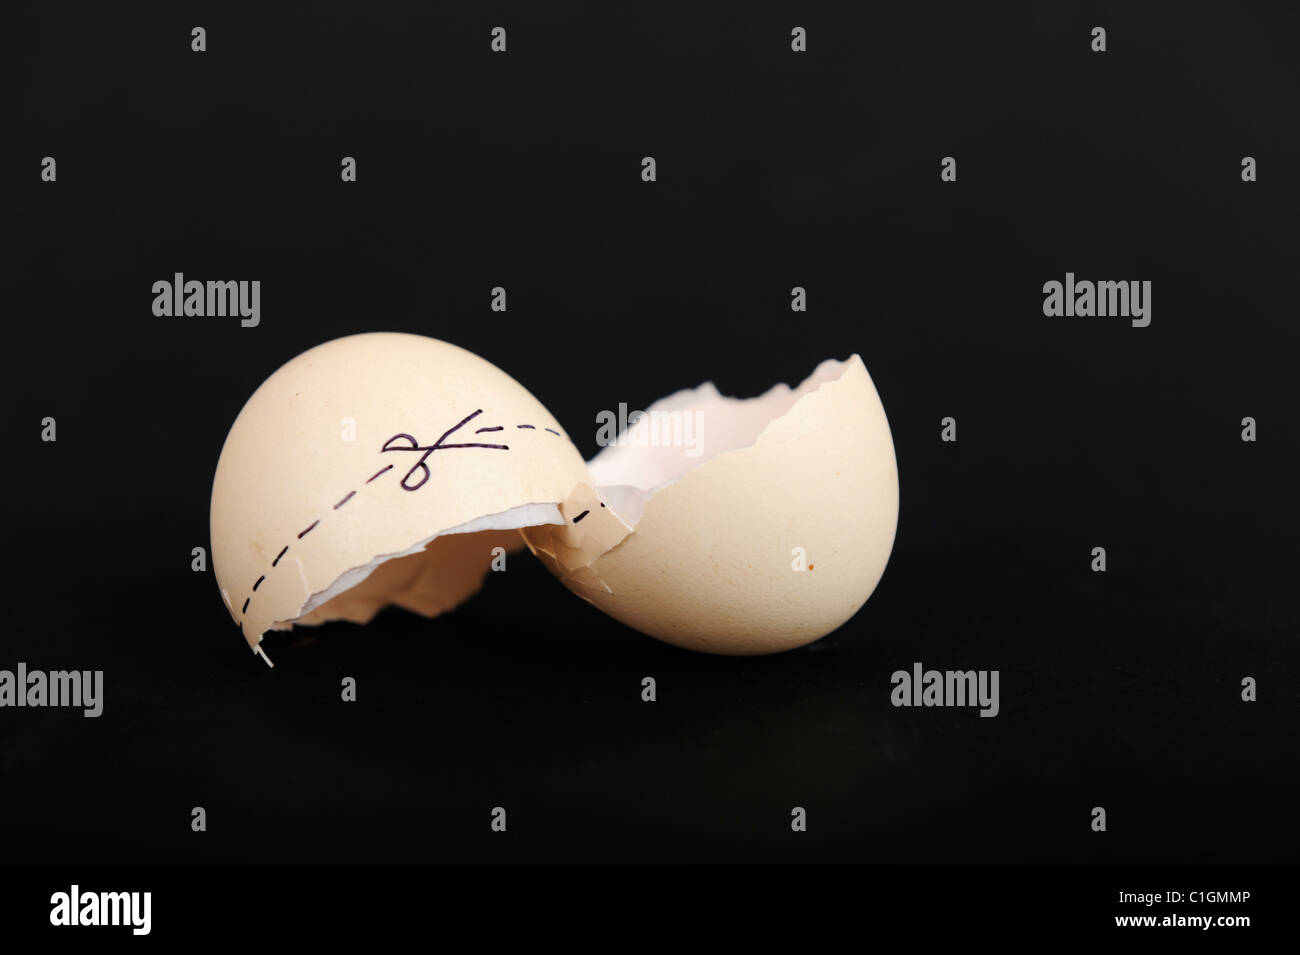 Stock photo of cracked egg shells with a cut here mark across the shell. Stock Photo